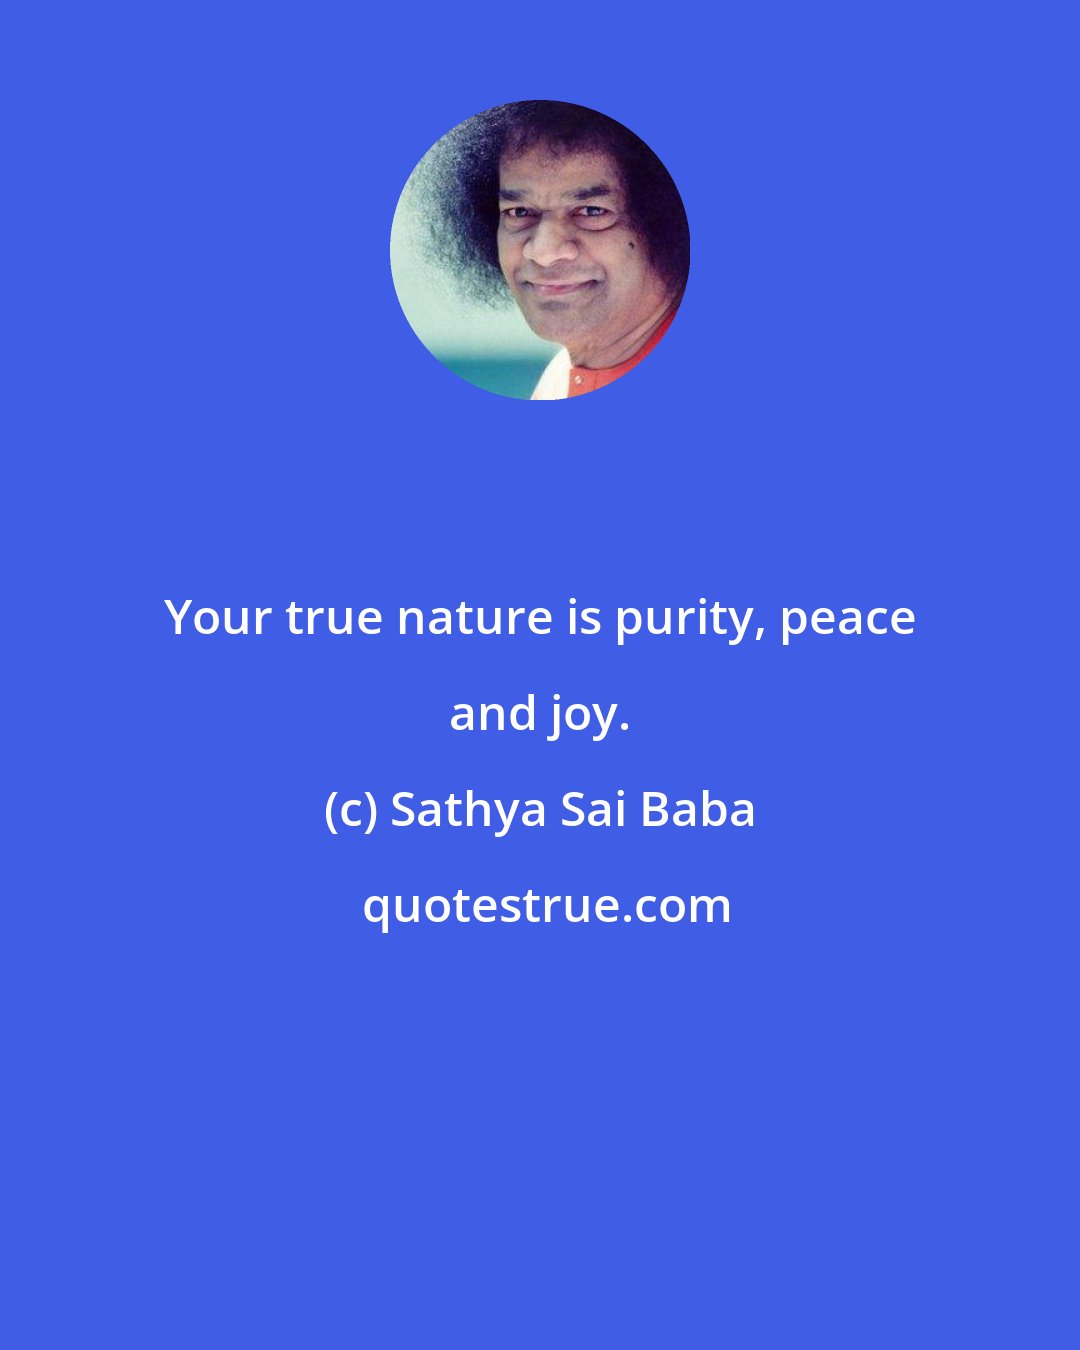 Sathya Sai Baba: Your true nature is purity, peace and joy.